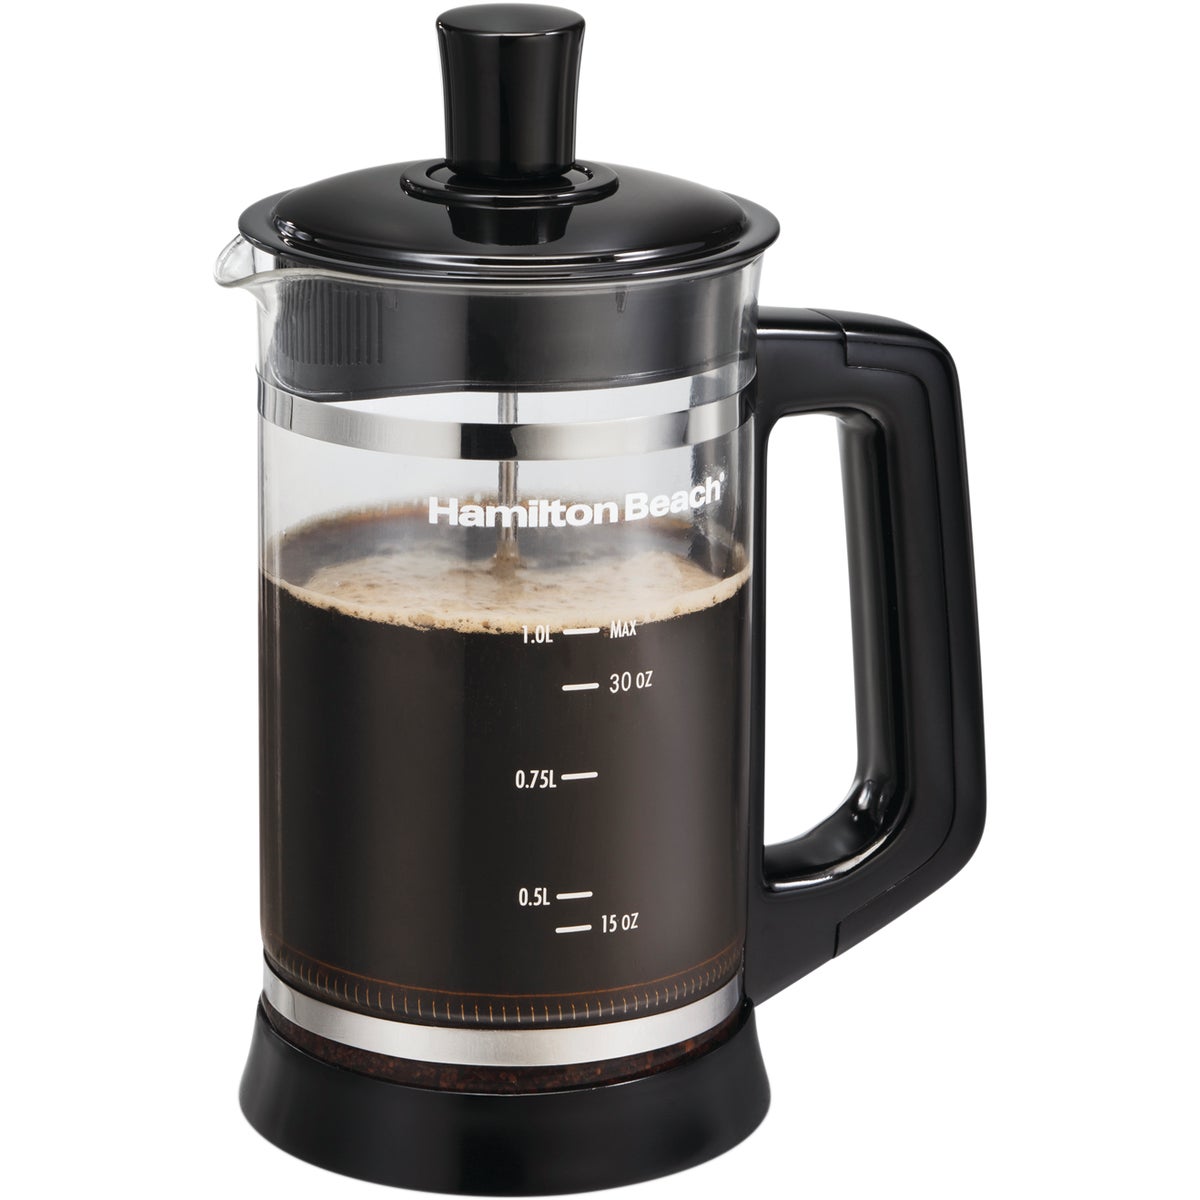 Item 675917, French Press with cocoa attachment makes great tasting hot coffee, cocoa, 